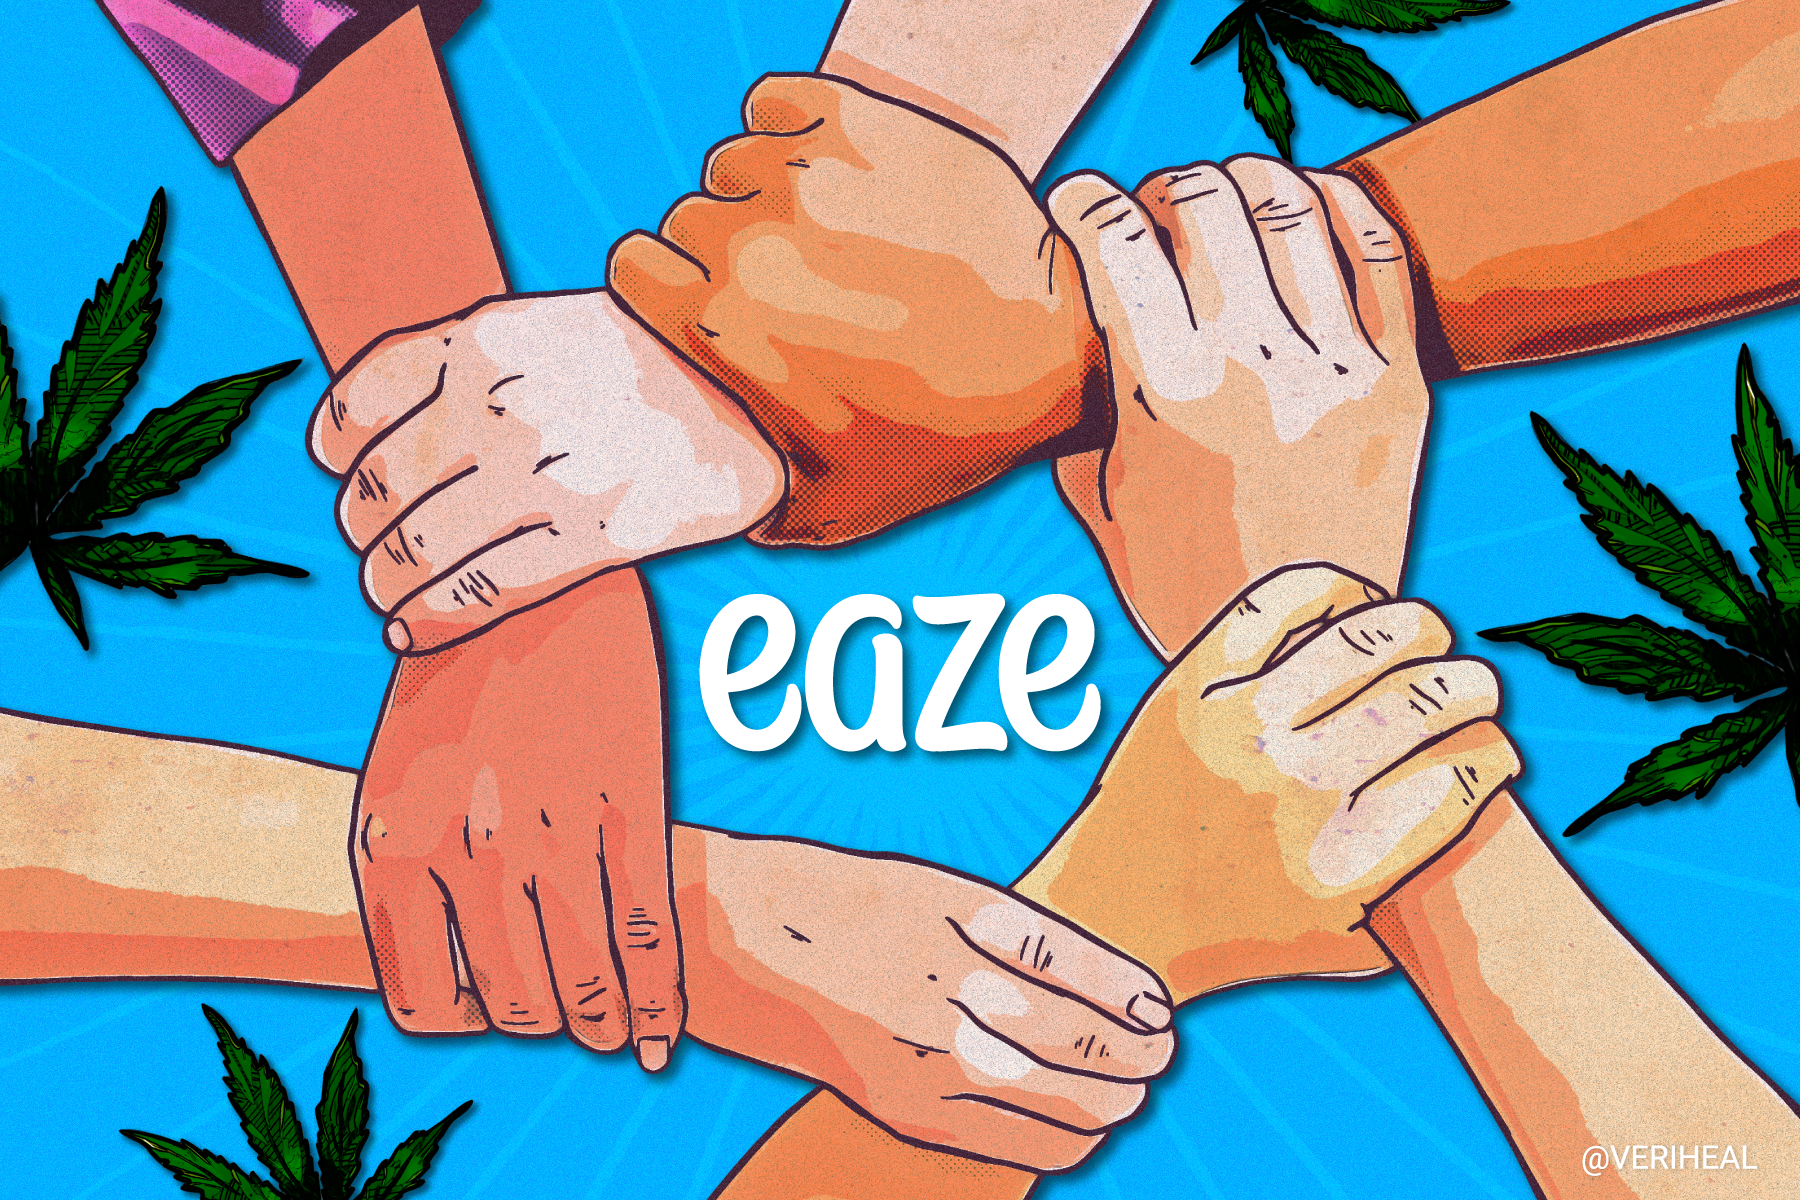 Eaze Establishes Program To Provide Low-Income Patients With Medical Cannabis